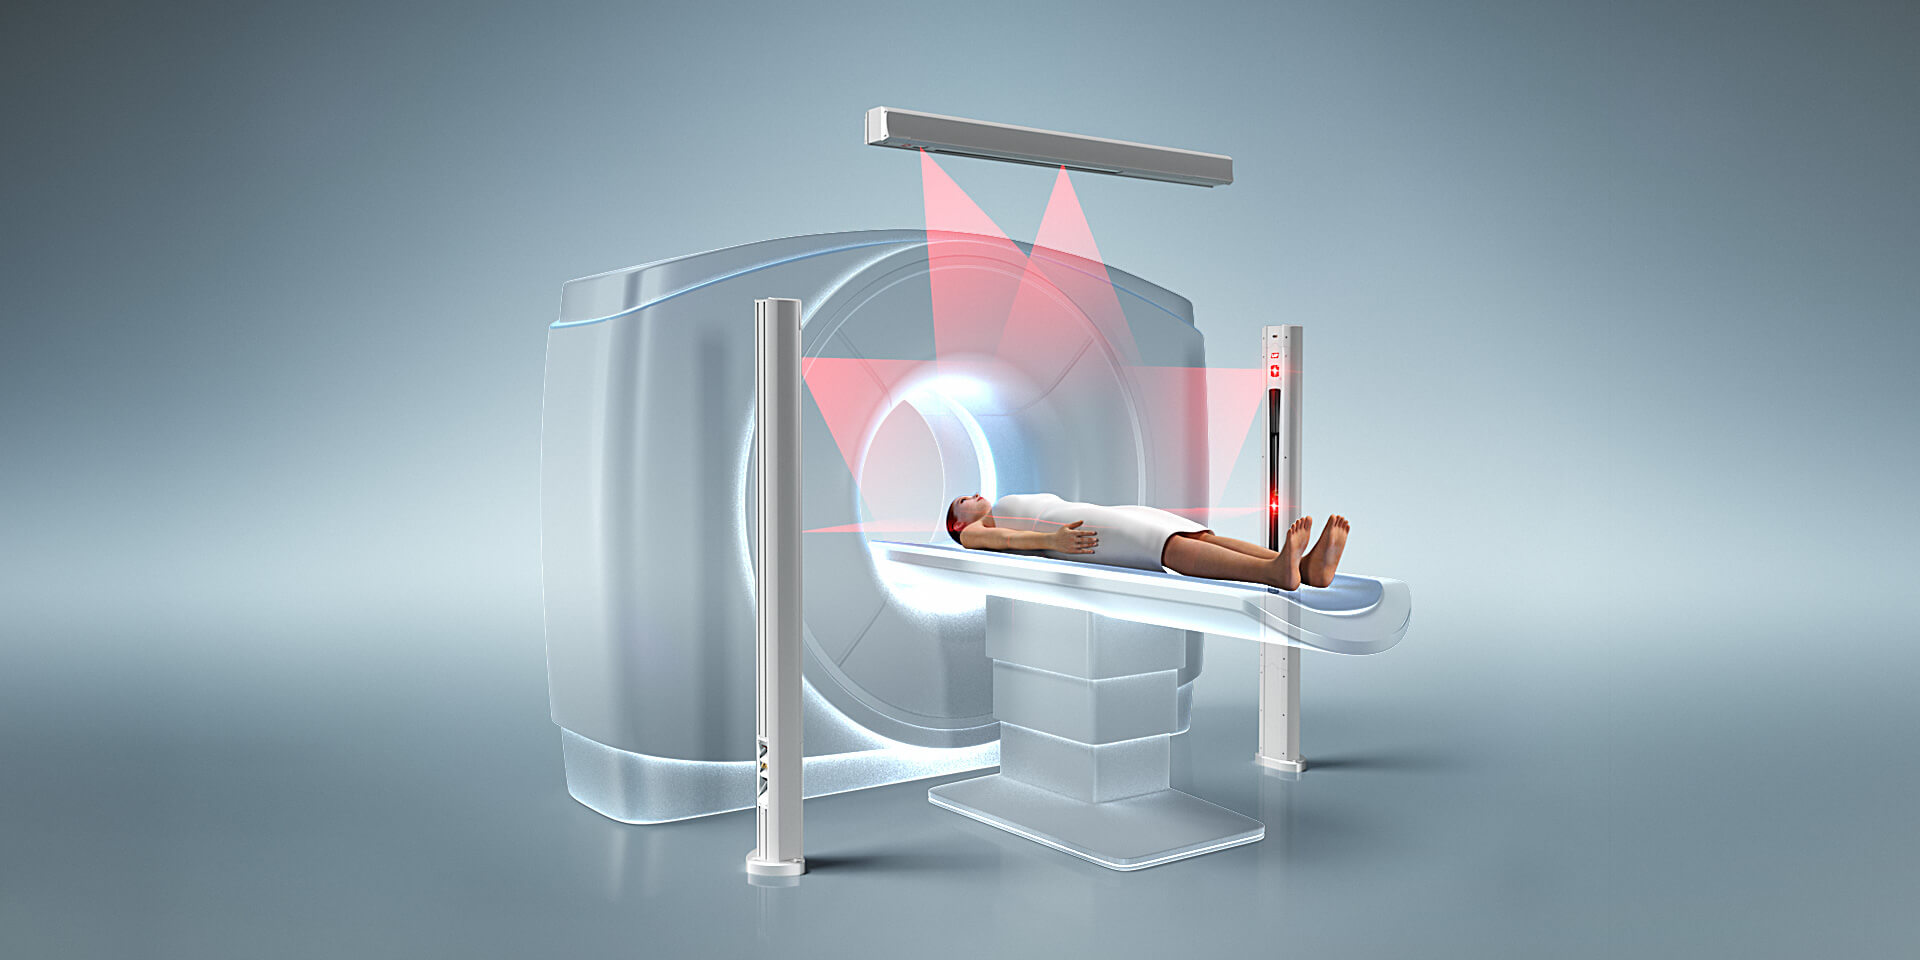 Patient positioning in radiation therapy